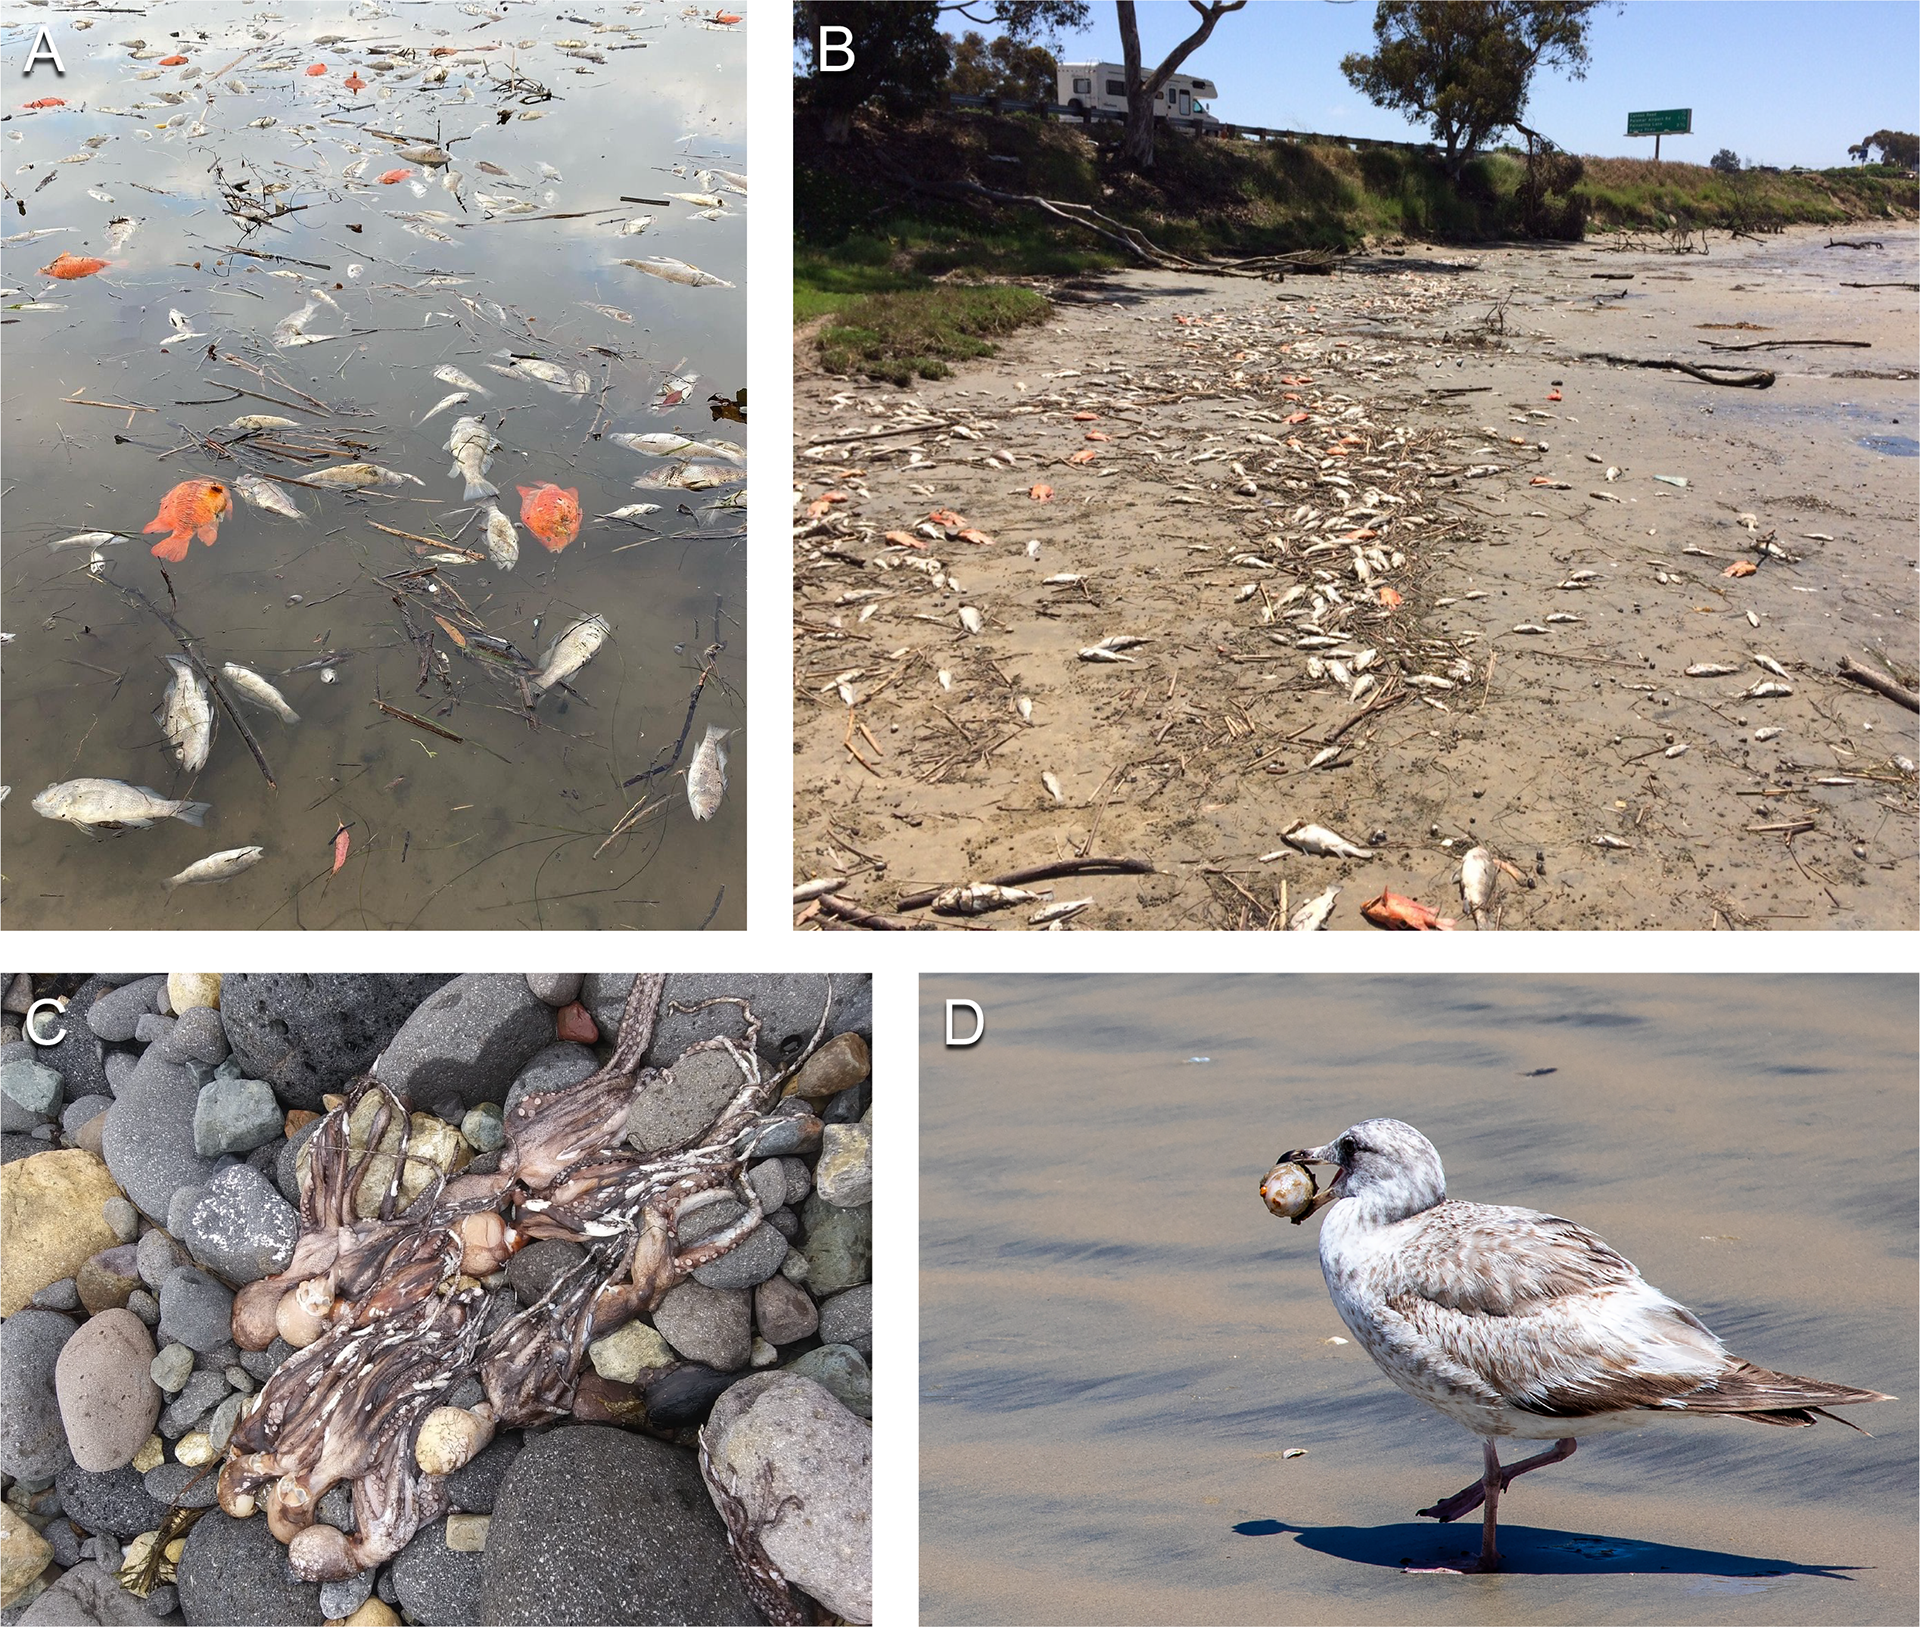 A compilation of photos showing fish and invertebrate mortality during the 2020 red tide, documented by local citizens. We see dead fish in the water and on the shore, dead octopuses, and a seabird with a dead organism in its beak.